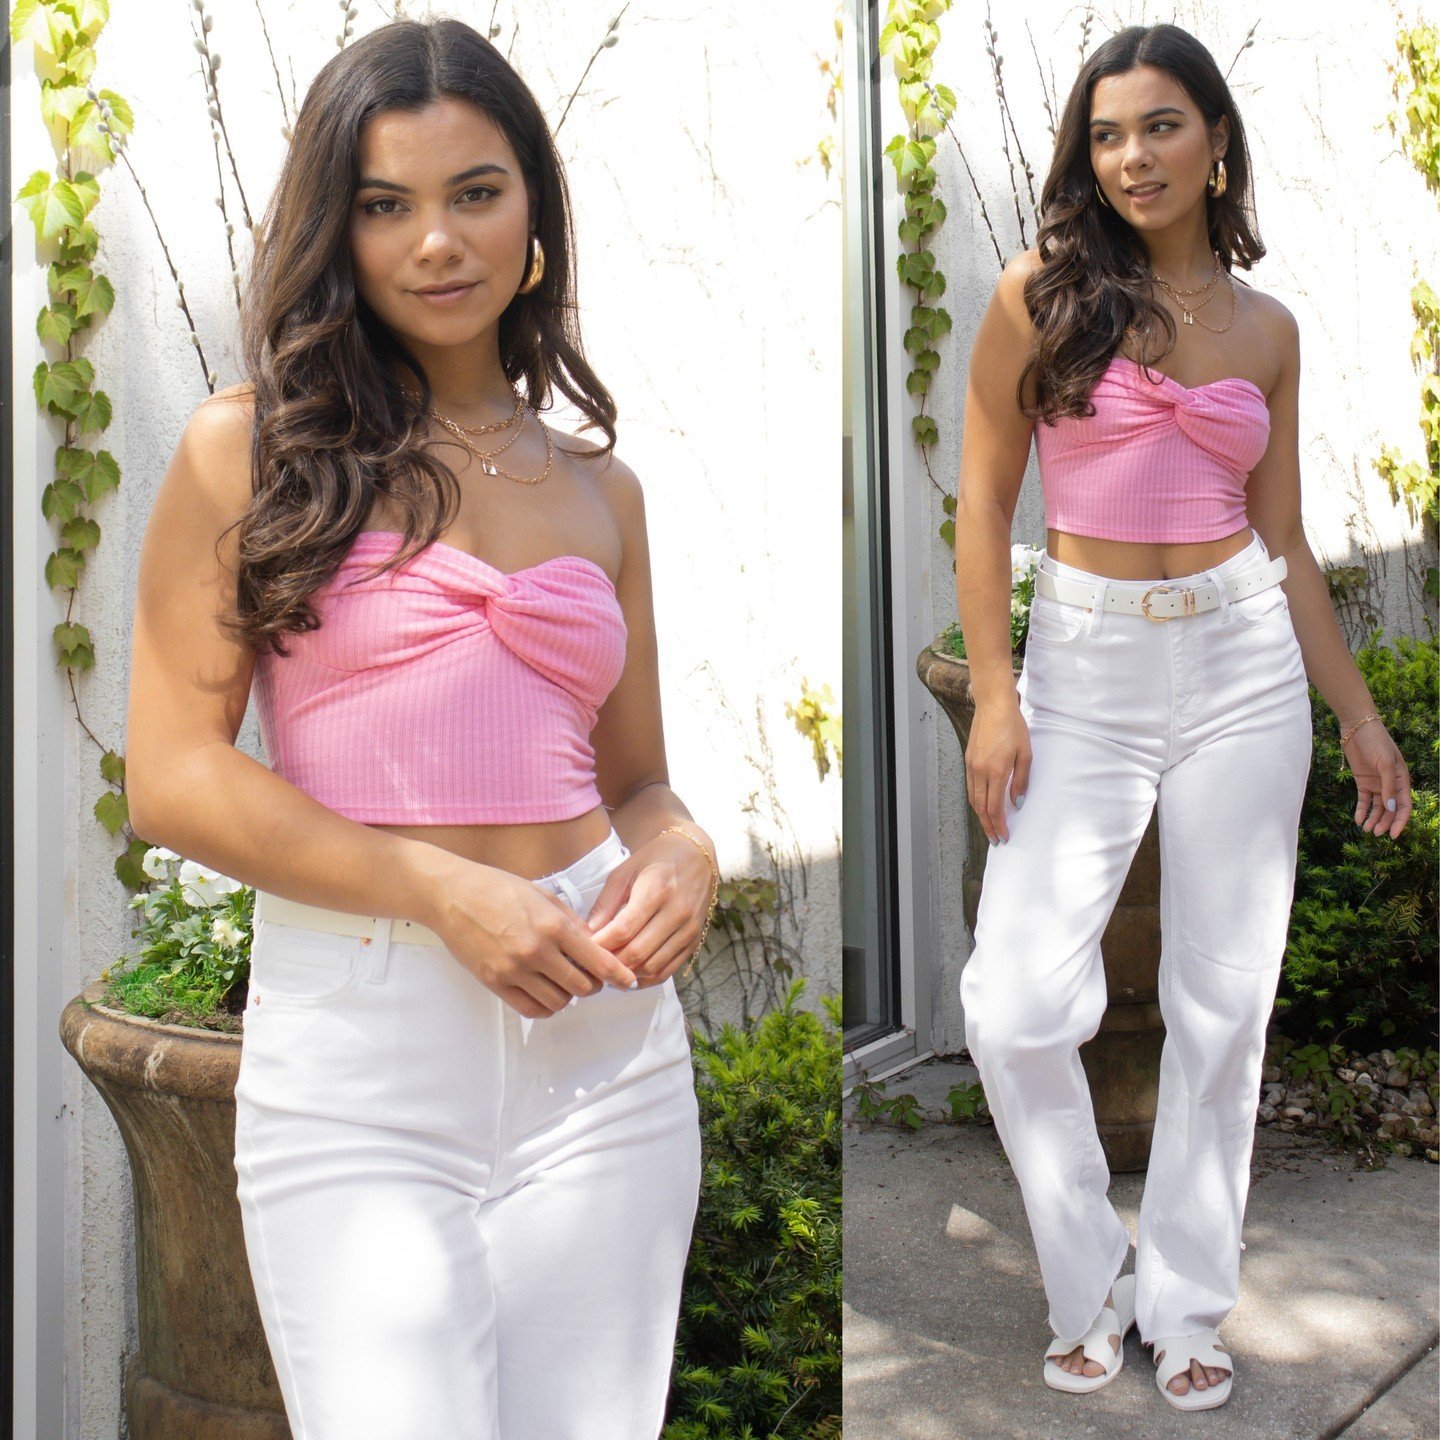 Don't know what to wear? Jeans and a cute top, always! 🤍 Here are 5 looks to get you inspired - which one is your fave? Discover your summer style in-store now! ✨ @discoveryclothing